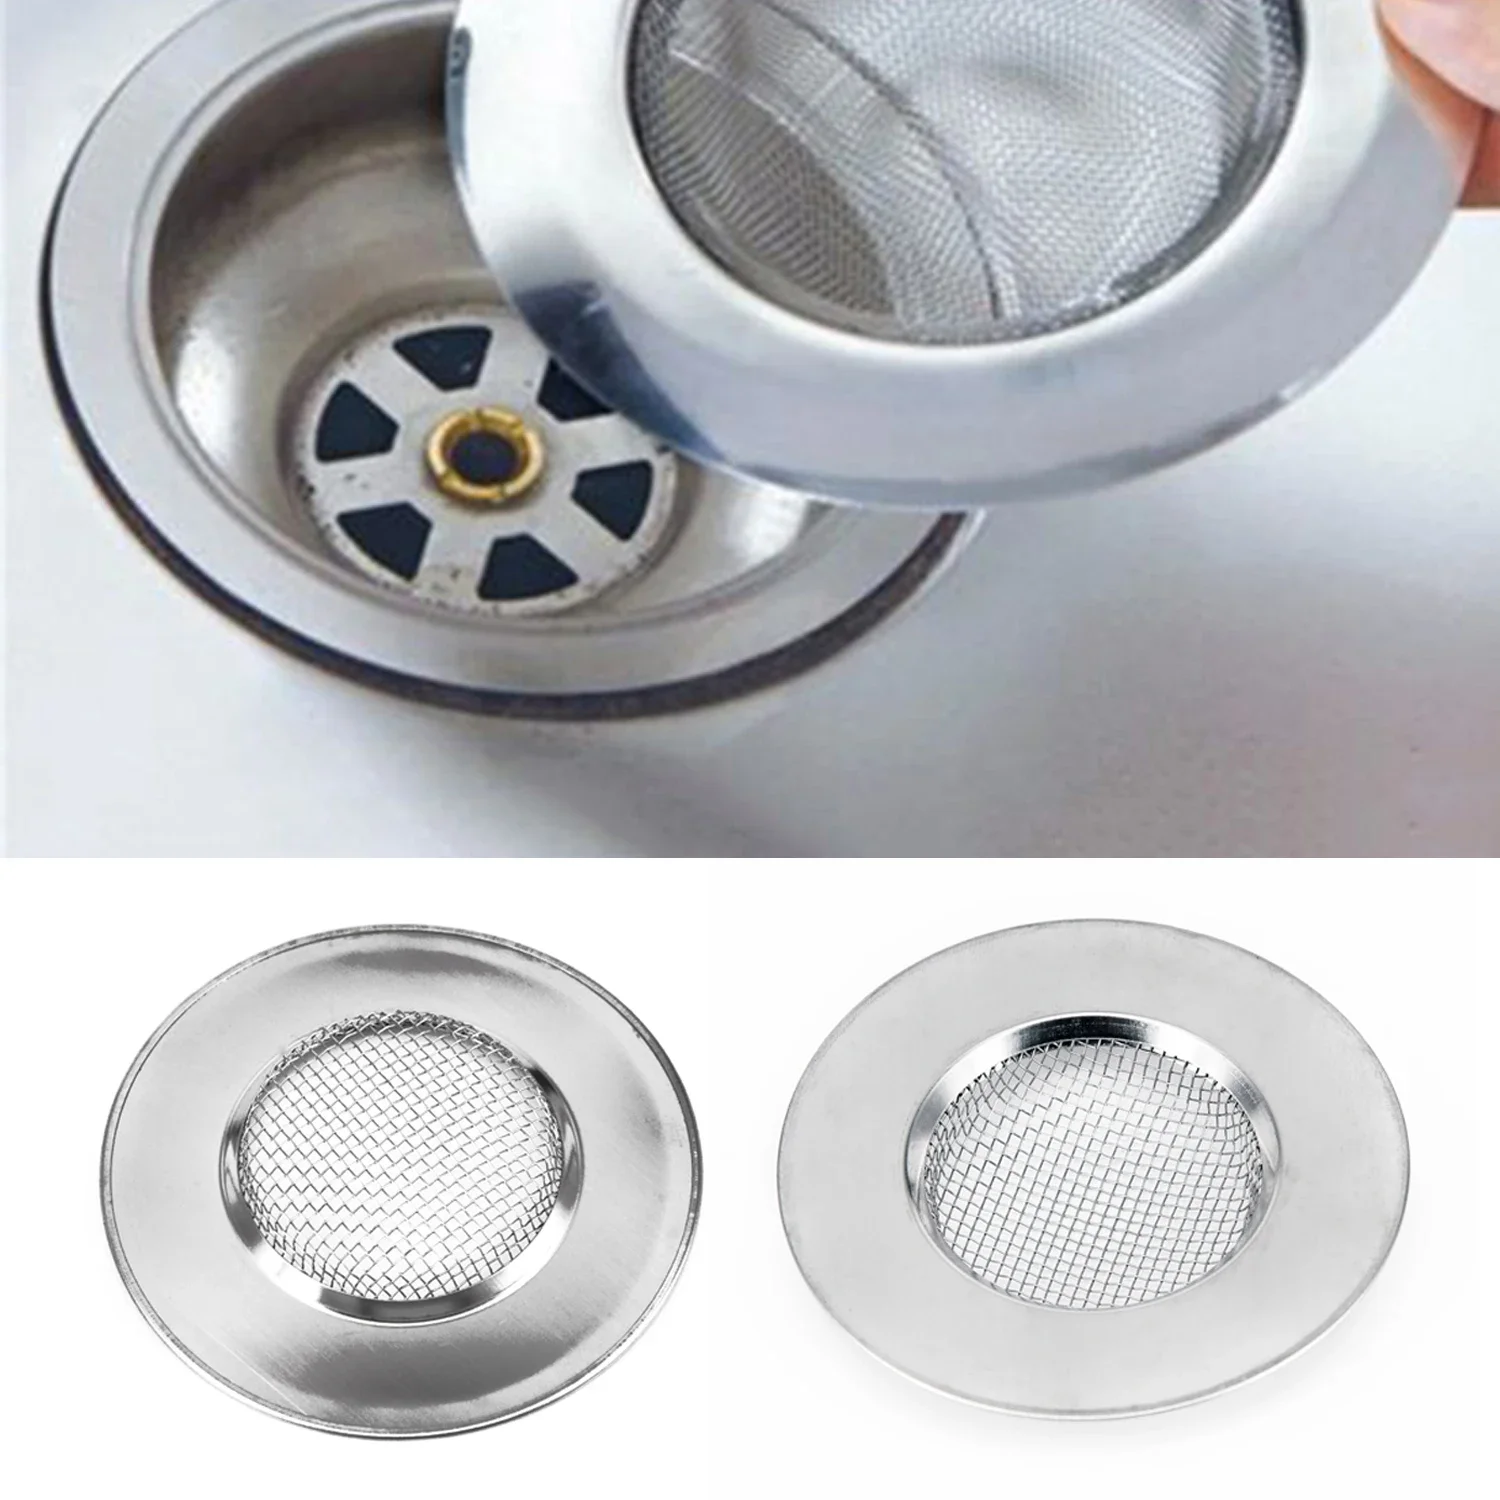 Stainless Steel Bathtub Hair Catcher Stopper Shower Drain Hole Filter With Handle Metal Sink Strainer Floor Drain For Kitchenl kitchen washbasin stainless steel sink strainer bathtub hair catcher stopper for shower sewer floor drain hole filter cover